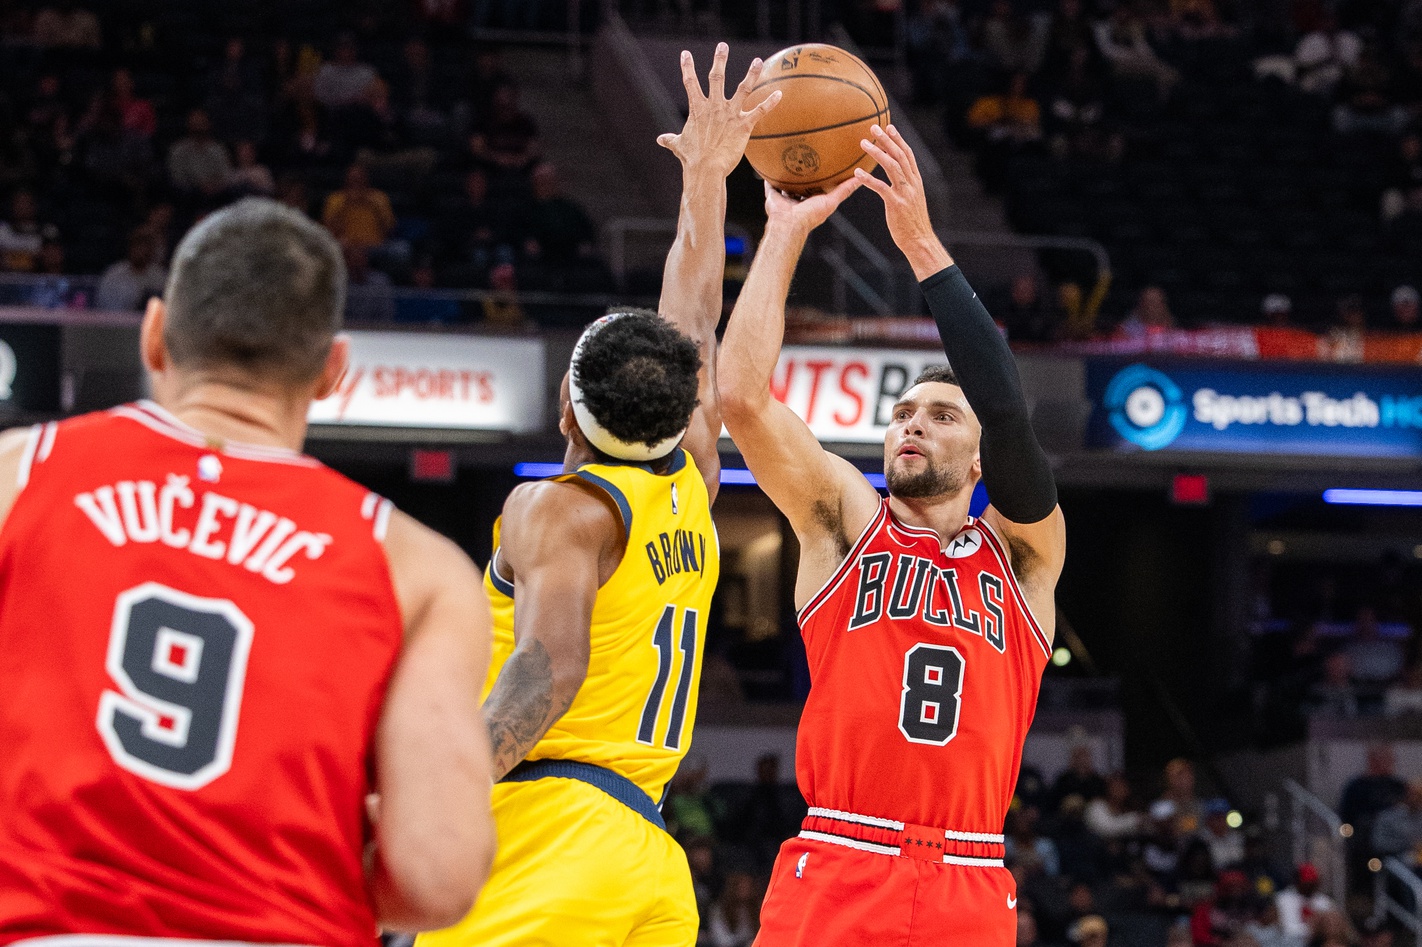 Oct 30, 2023; Indianapolis, Indiana, USA; Chicago Bulls guard Zach LaVine (8) shoots the ball while Indiana Pacers forward Bruce Brown (11) defends in the first quarter at Gainbridge Fieldhouse. Mandatory Credit: Trevor Ruszkowski-USA TODAY Sports